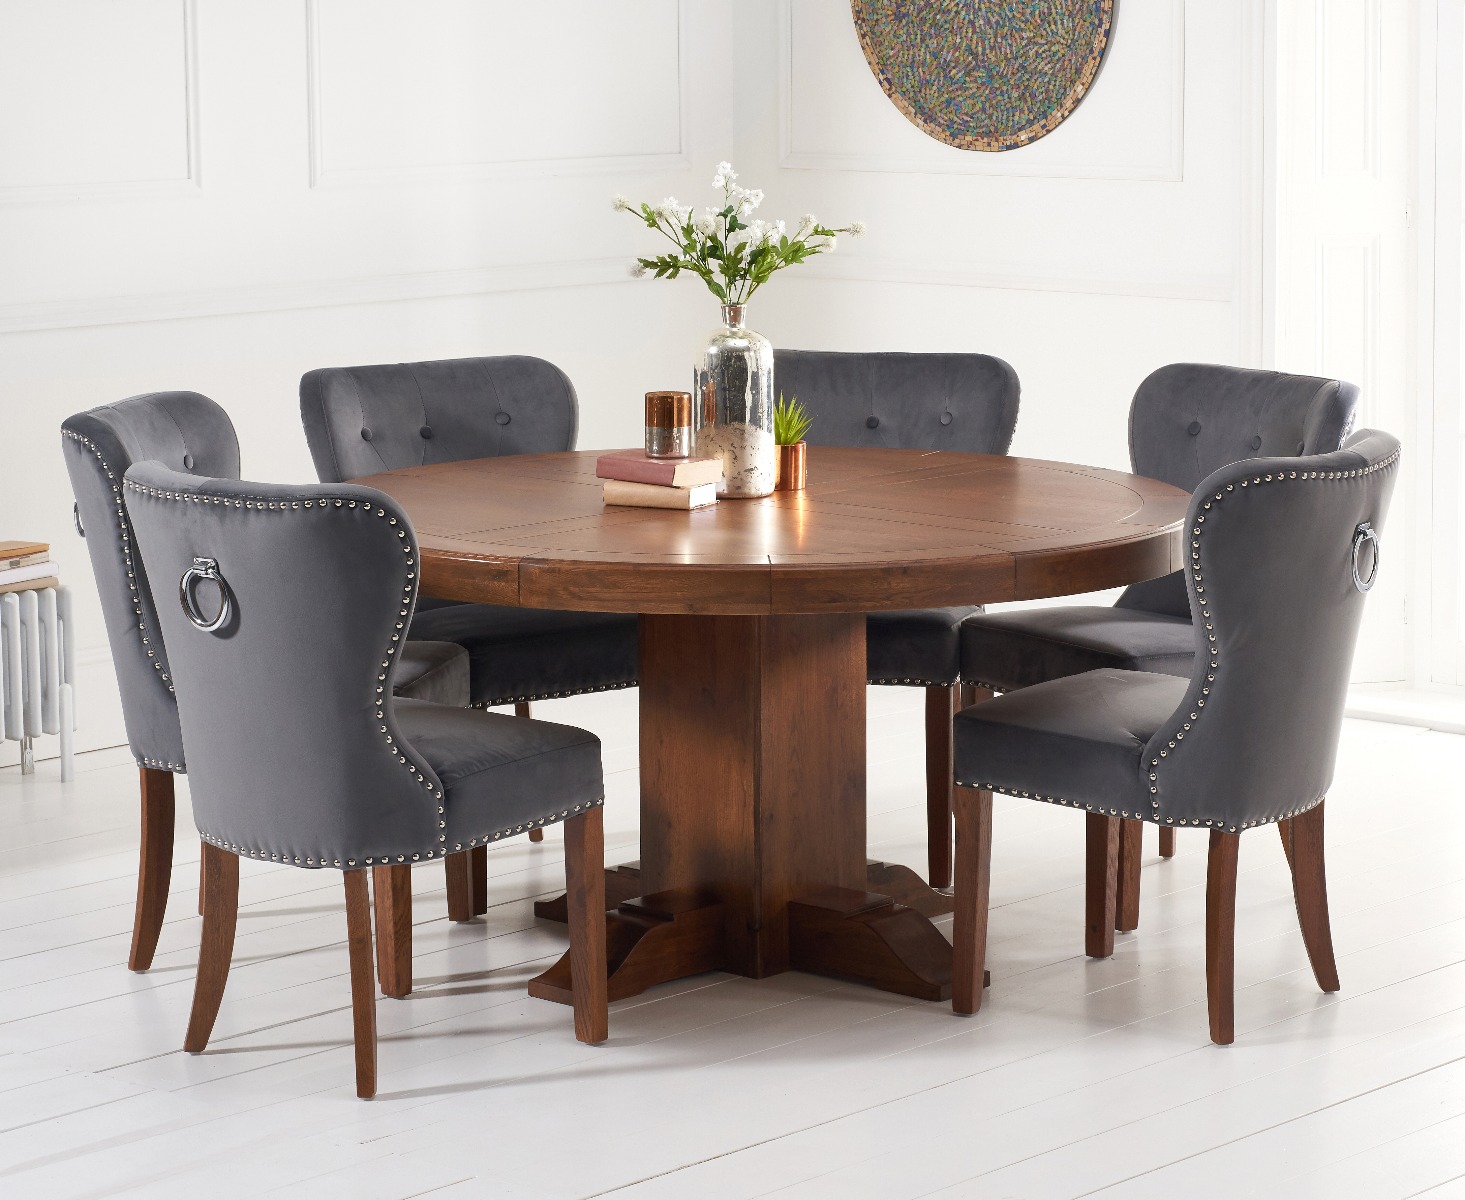 Photo 1 of Helmsley 150cm dark oak round pedestal dining table with 8 grey keswick chairs